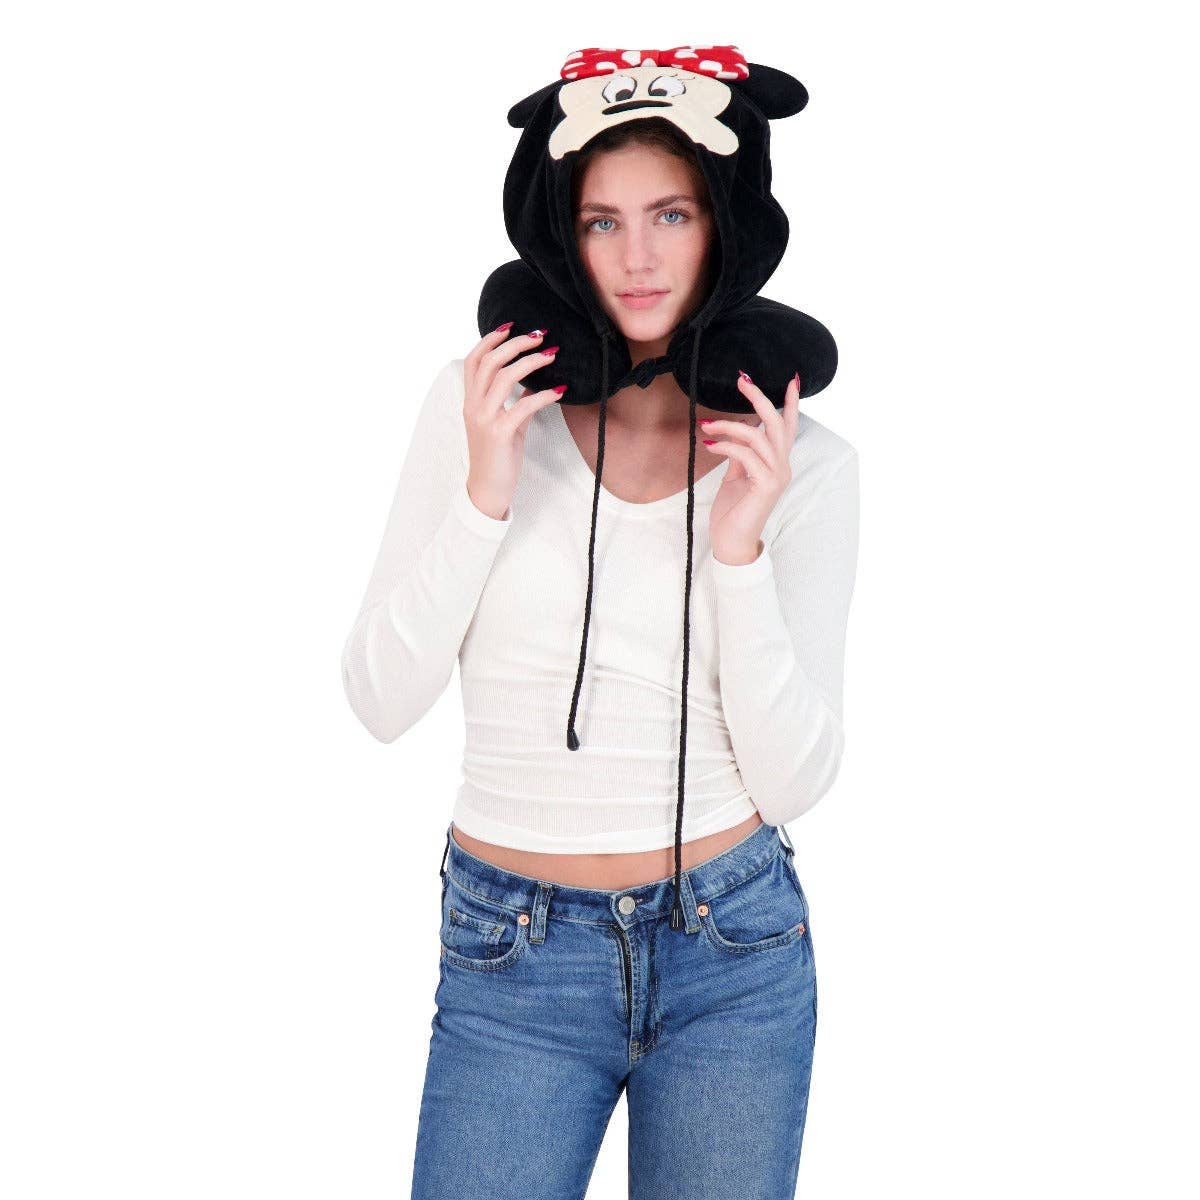 Minnie Mouse Travel Neck Pillow Hoodie, Black